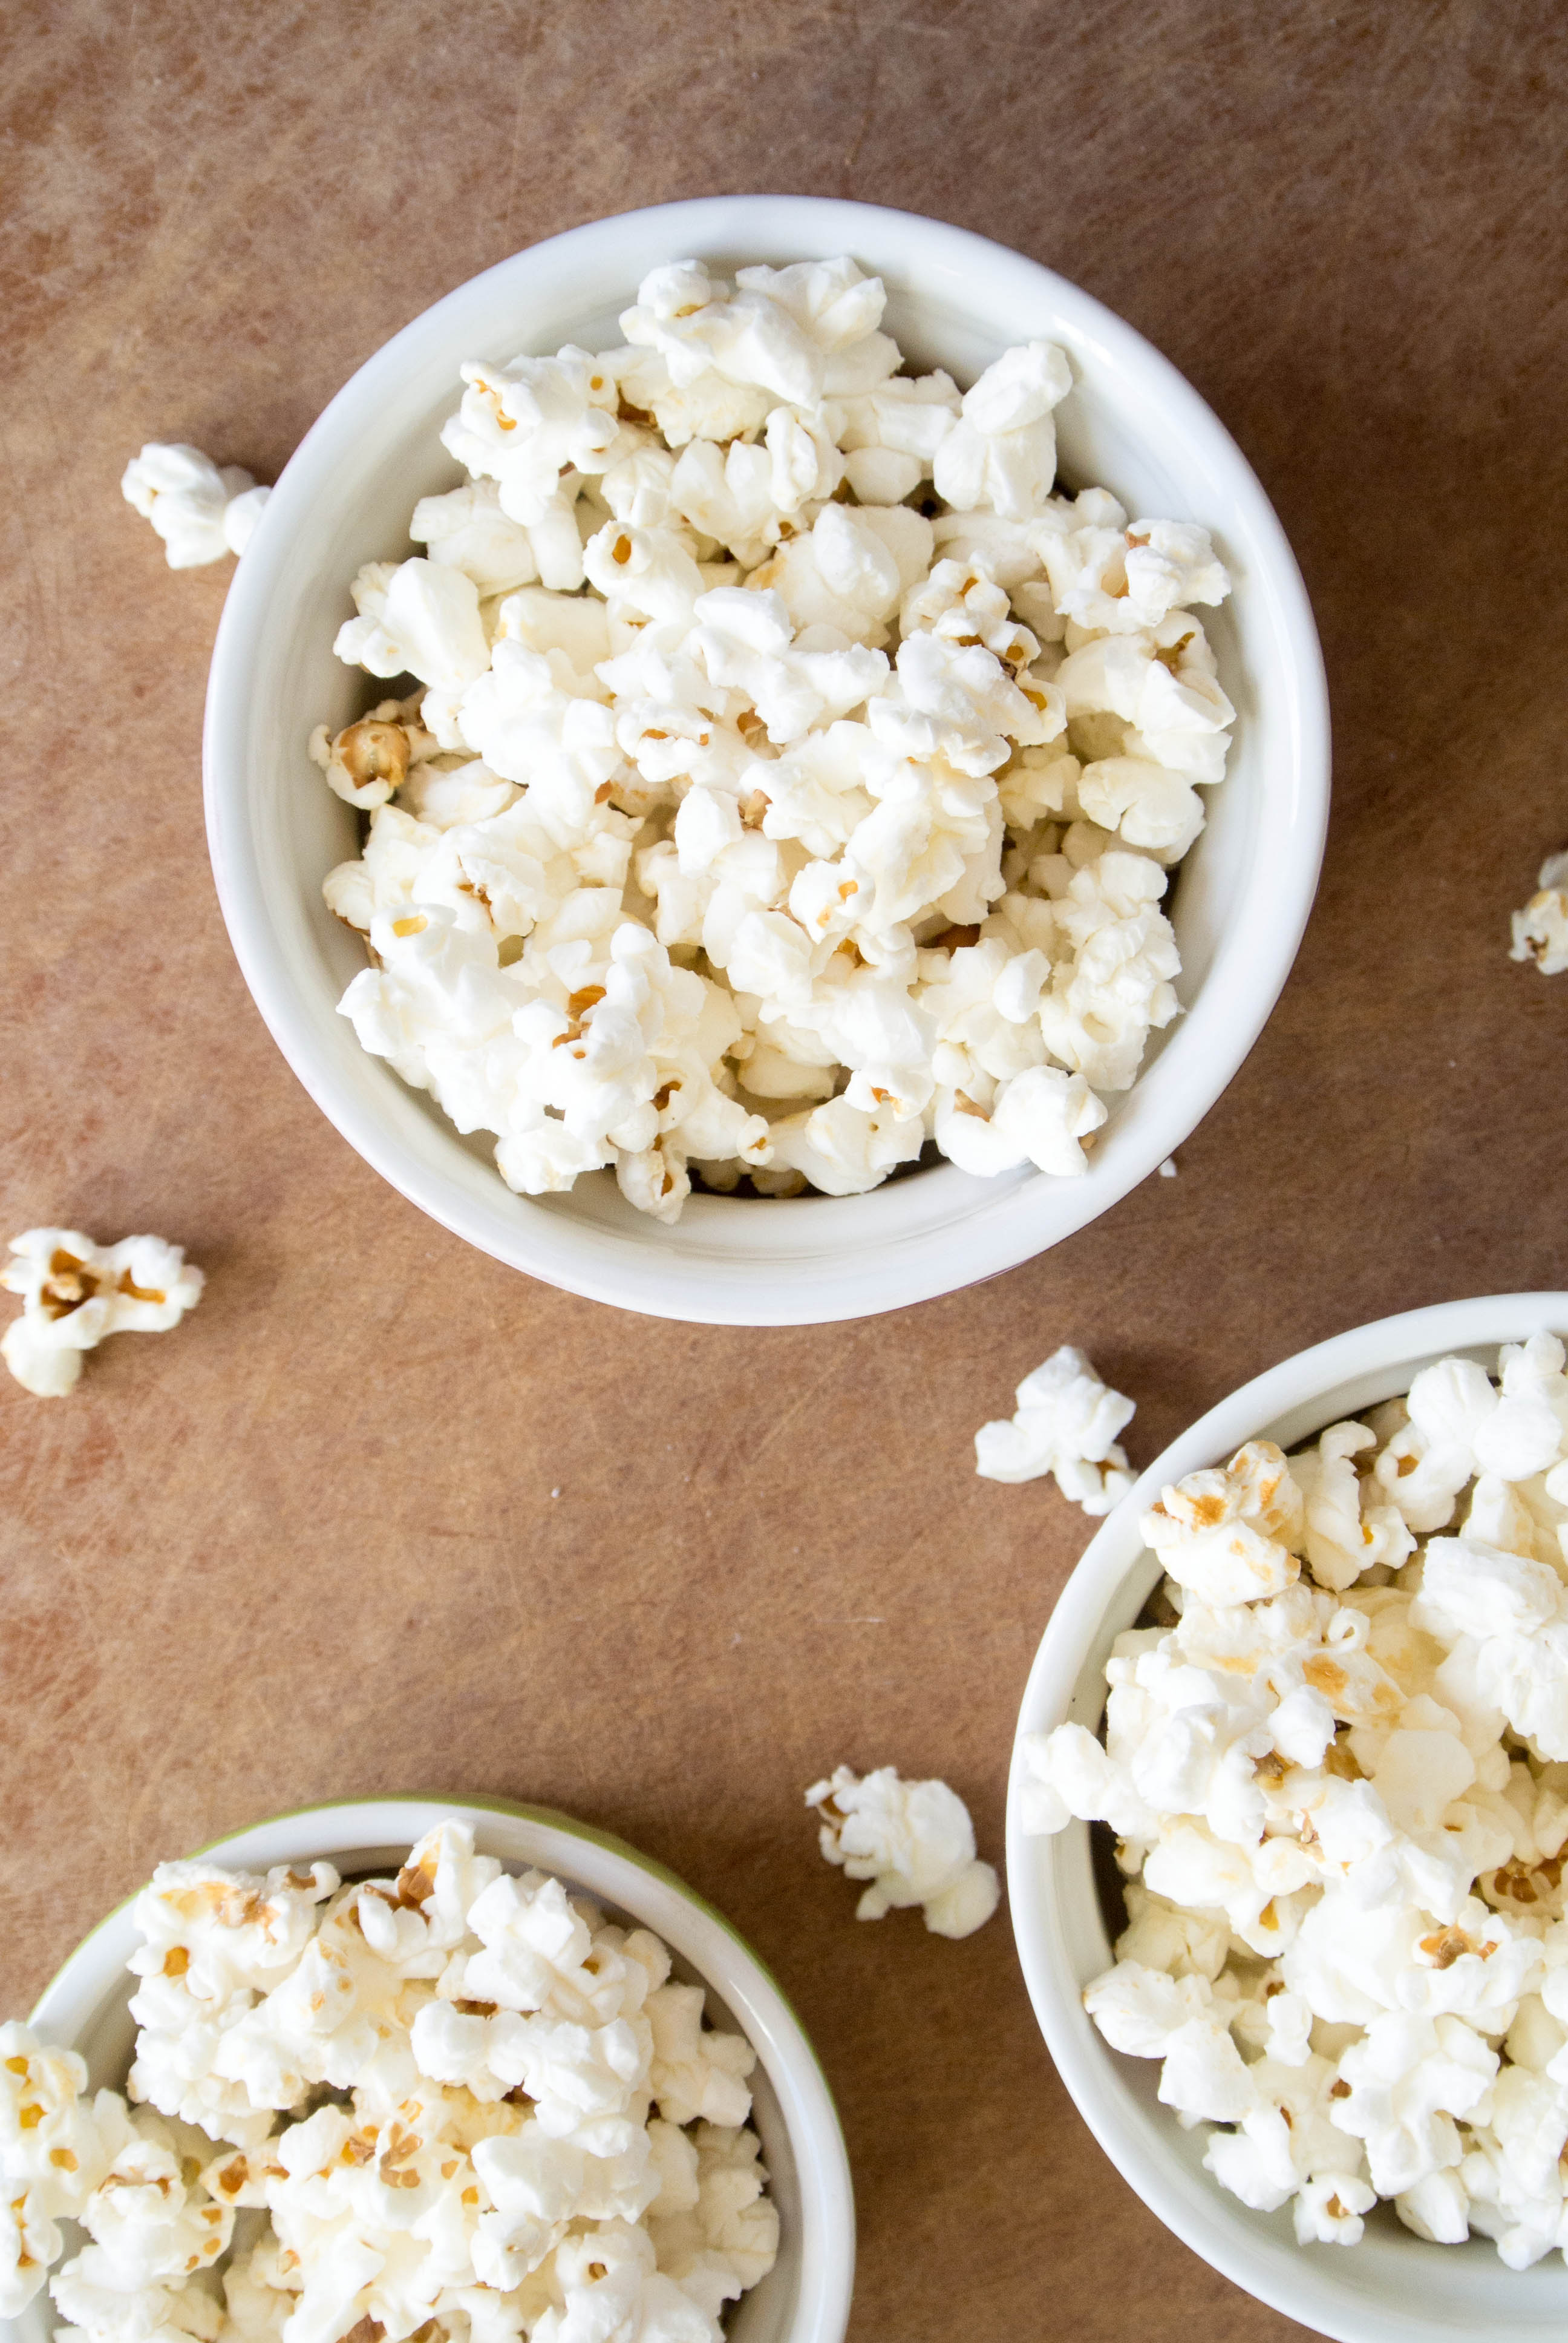 Start your own kettle corn business